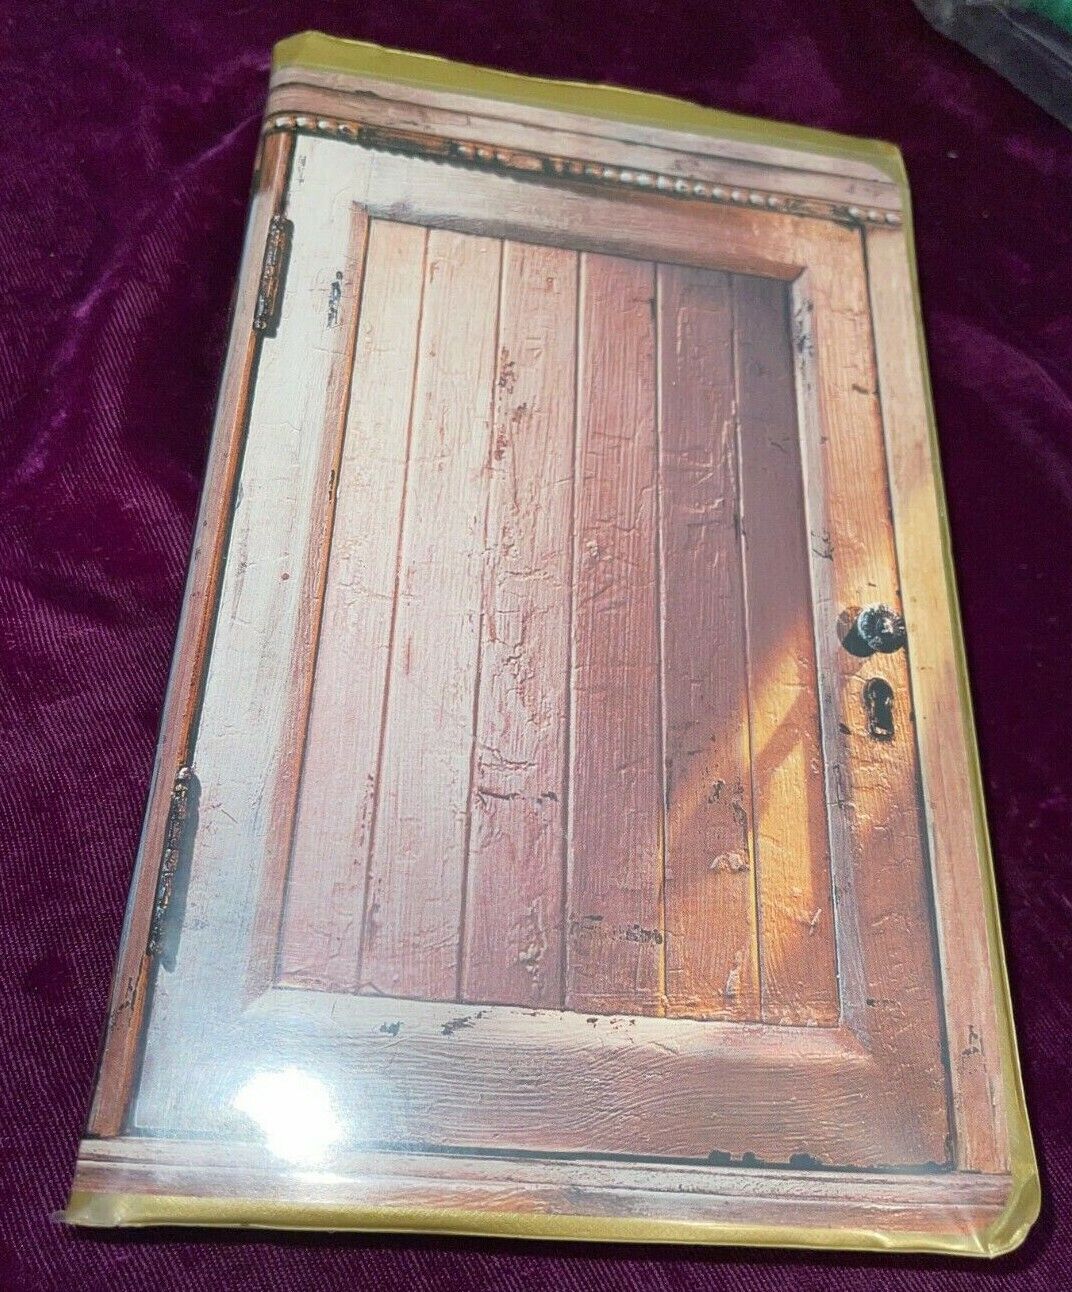 RARE THE INDIAN IN THE CUPBOARD VHS TAPE VINTAGE COLLECTORS CLAMSHELL CASE 